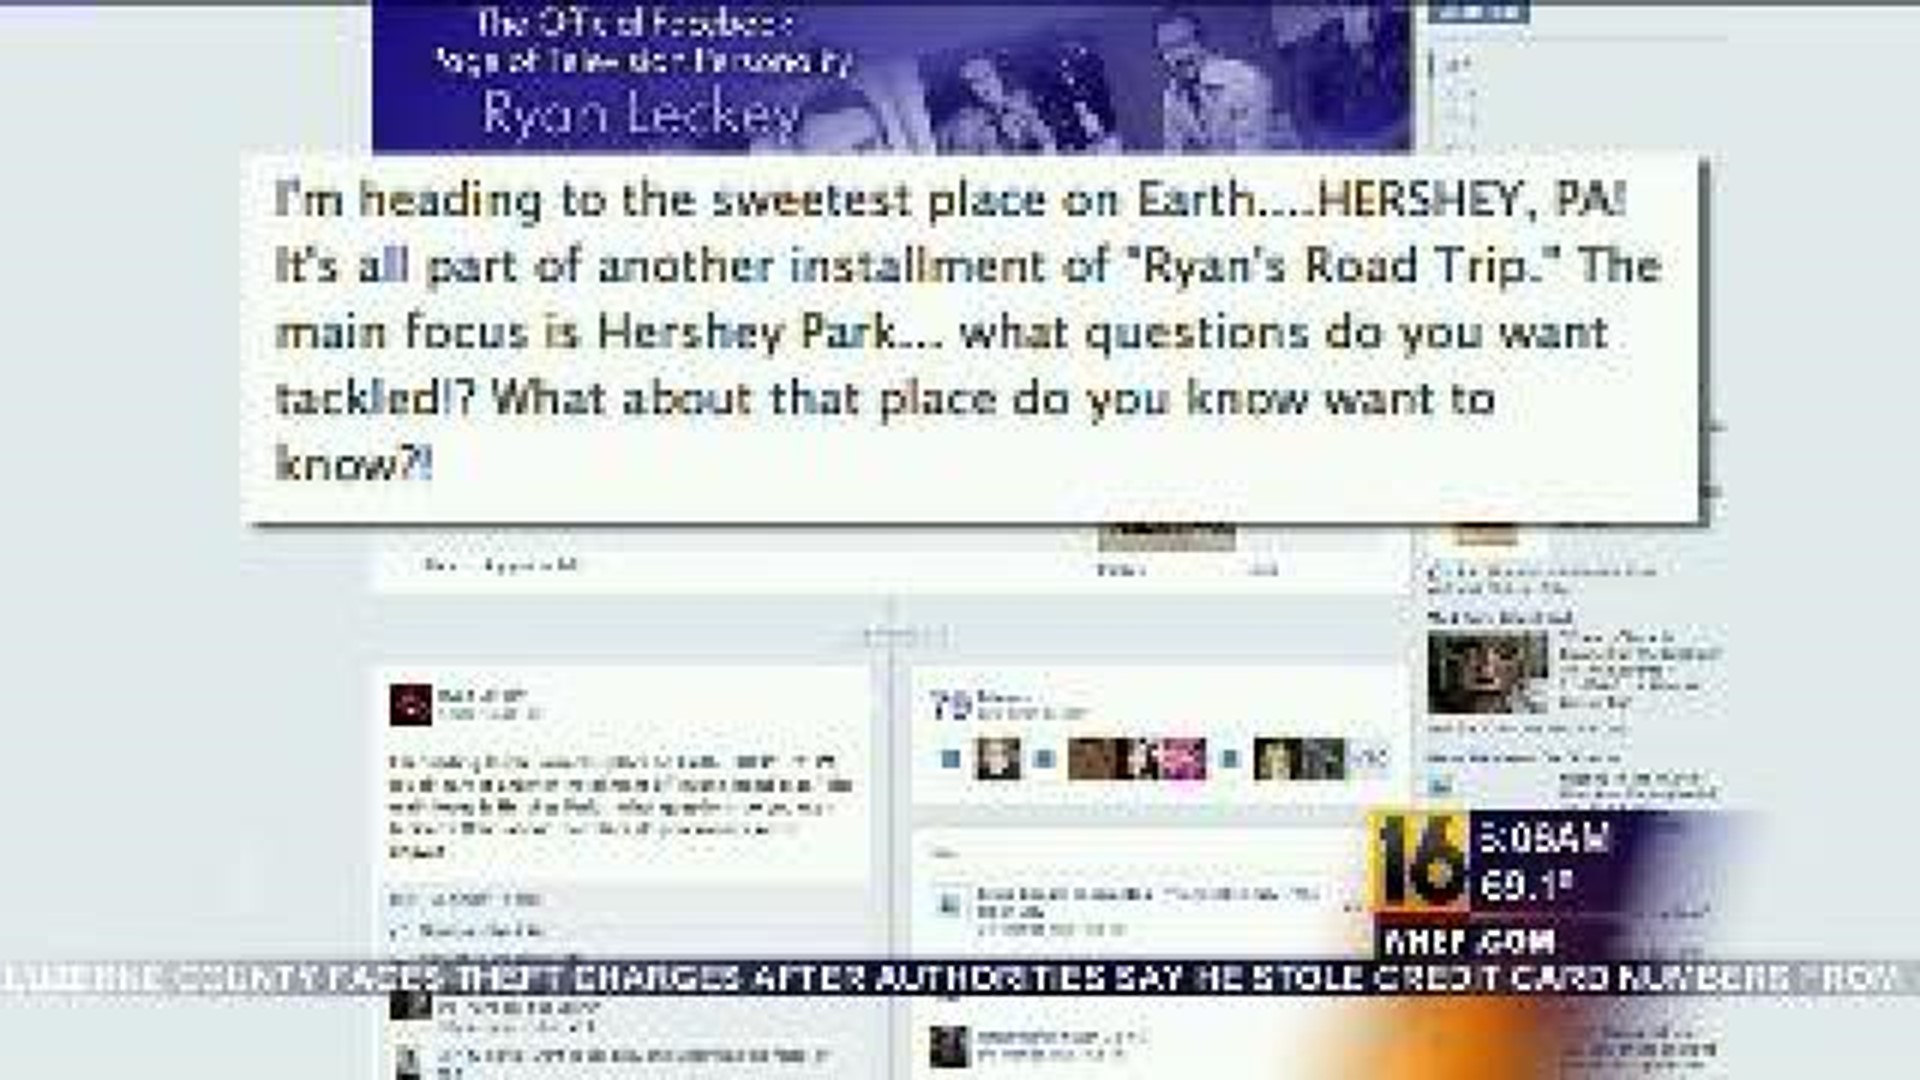 Ryan's Road Trip: Your Hershey Park Questions Answered